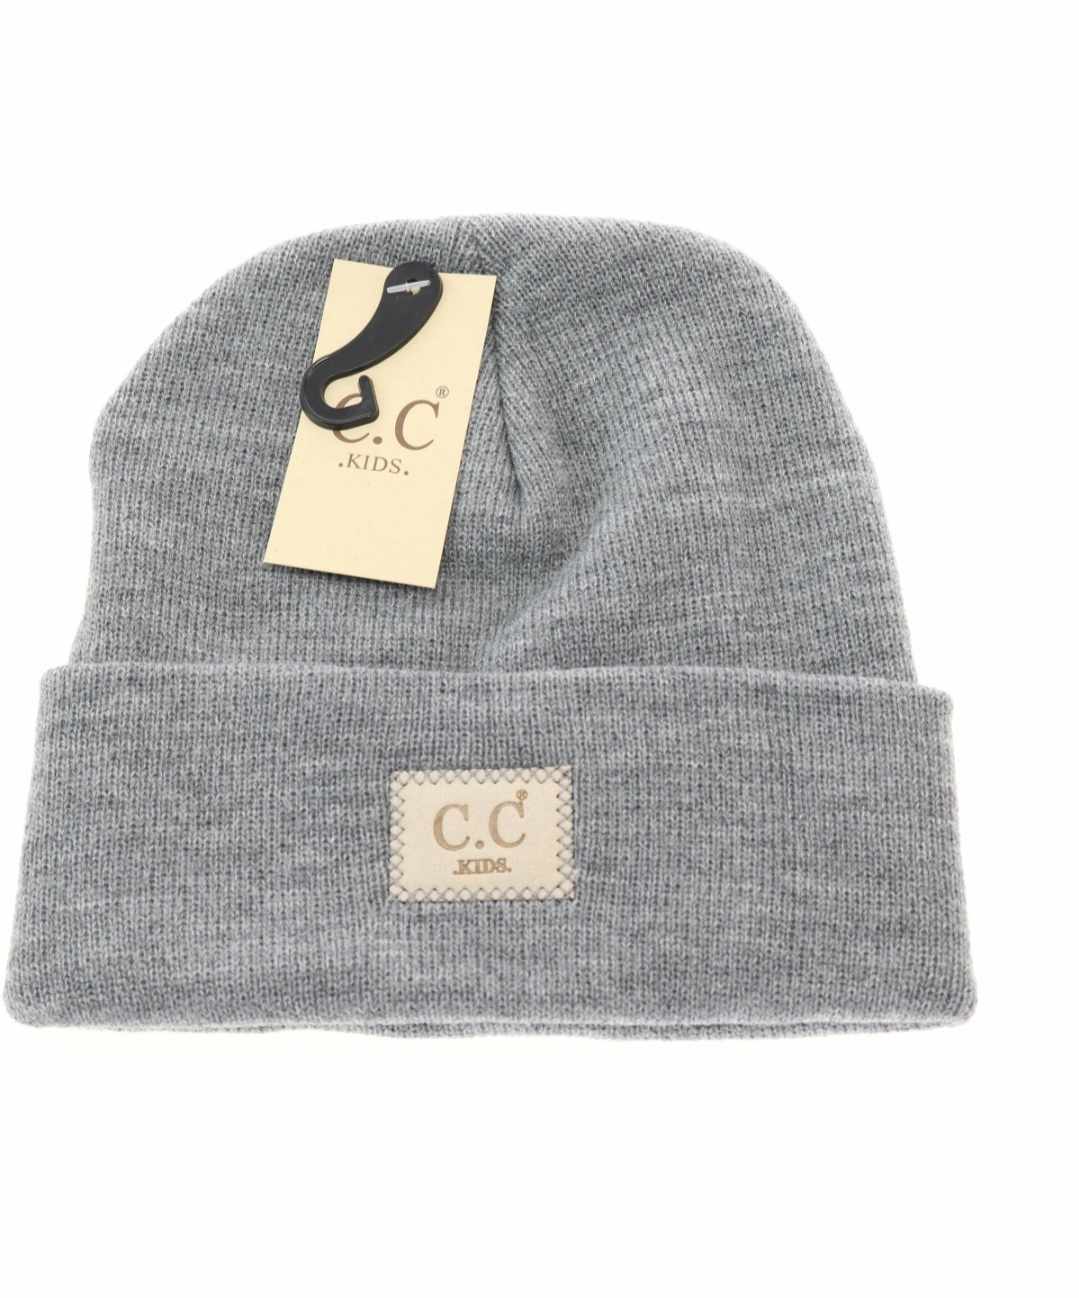 Kids Oversized Beanie Hat  A Touch of Magnolia Boutique Grey  